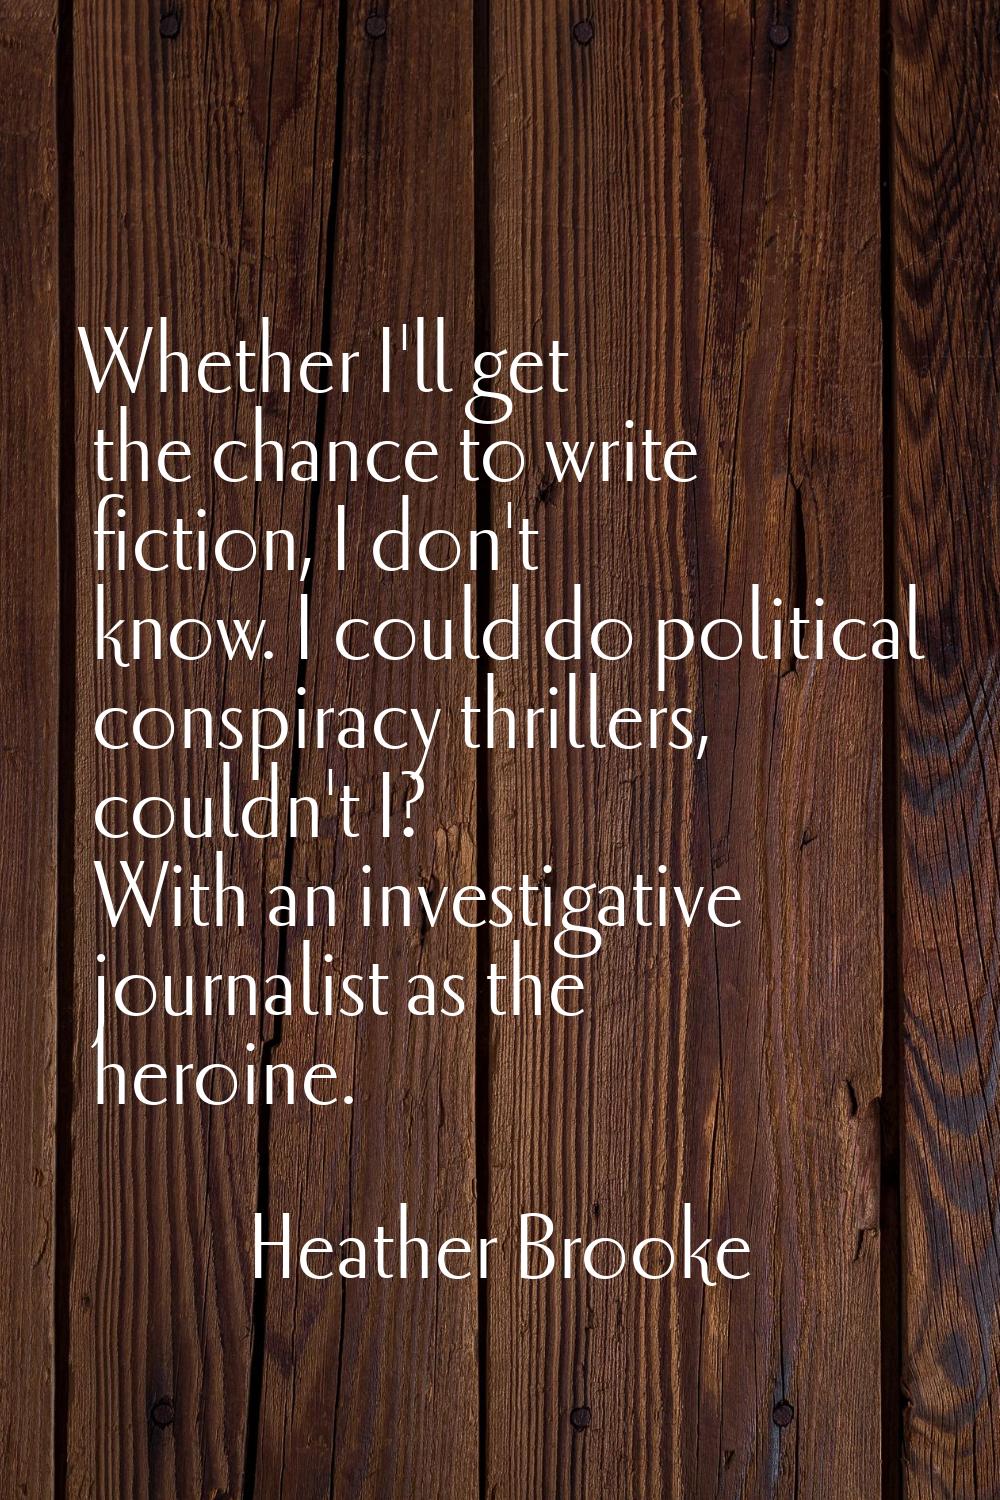 Whether I'll get the chance to write fiction, I don't know. I could do political conspiracy thrille